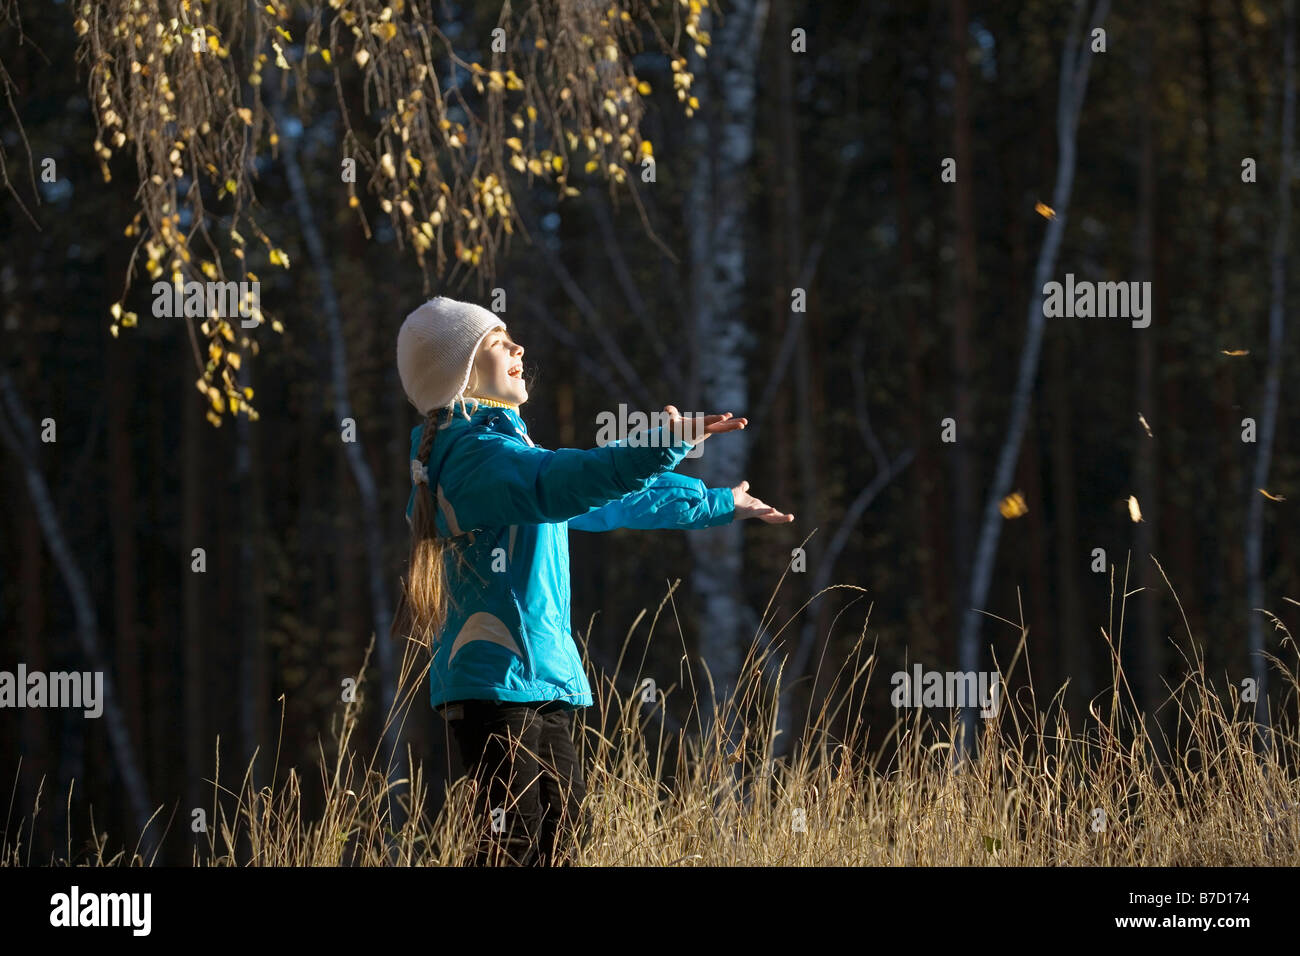 A young girl in a field catching leaves Stock Photo